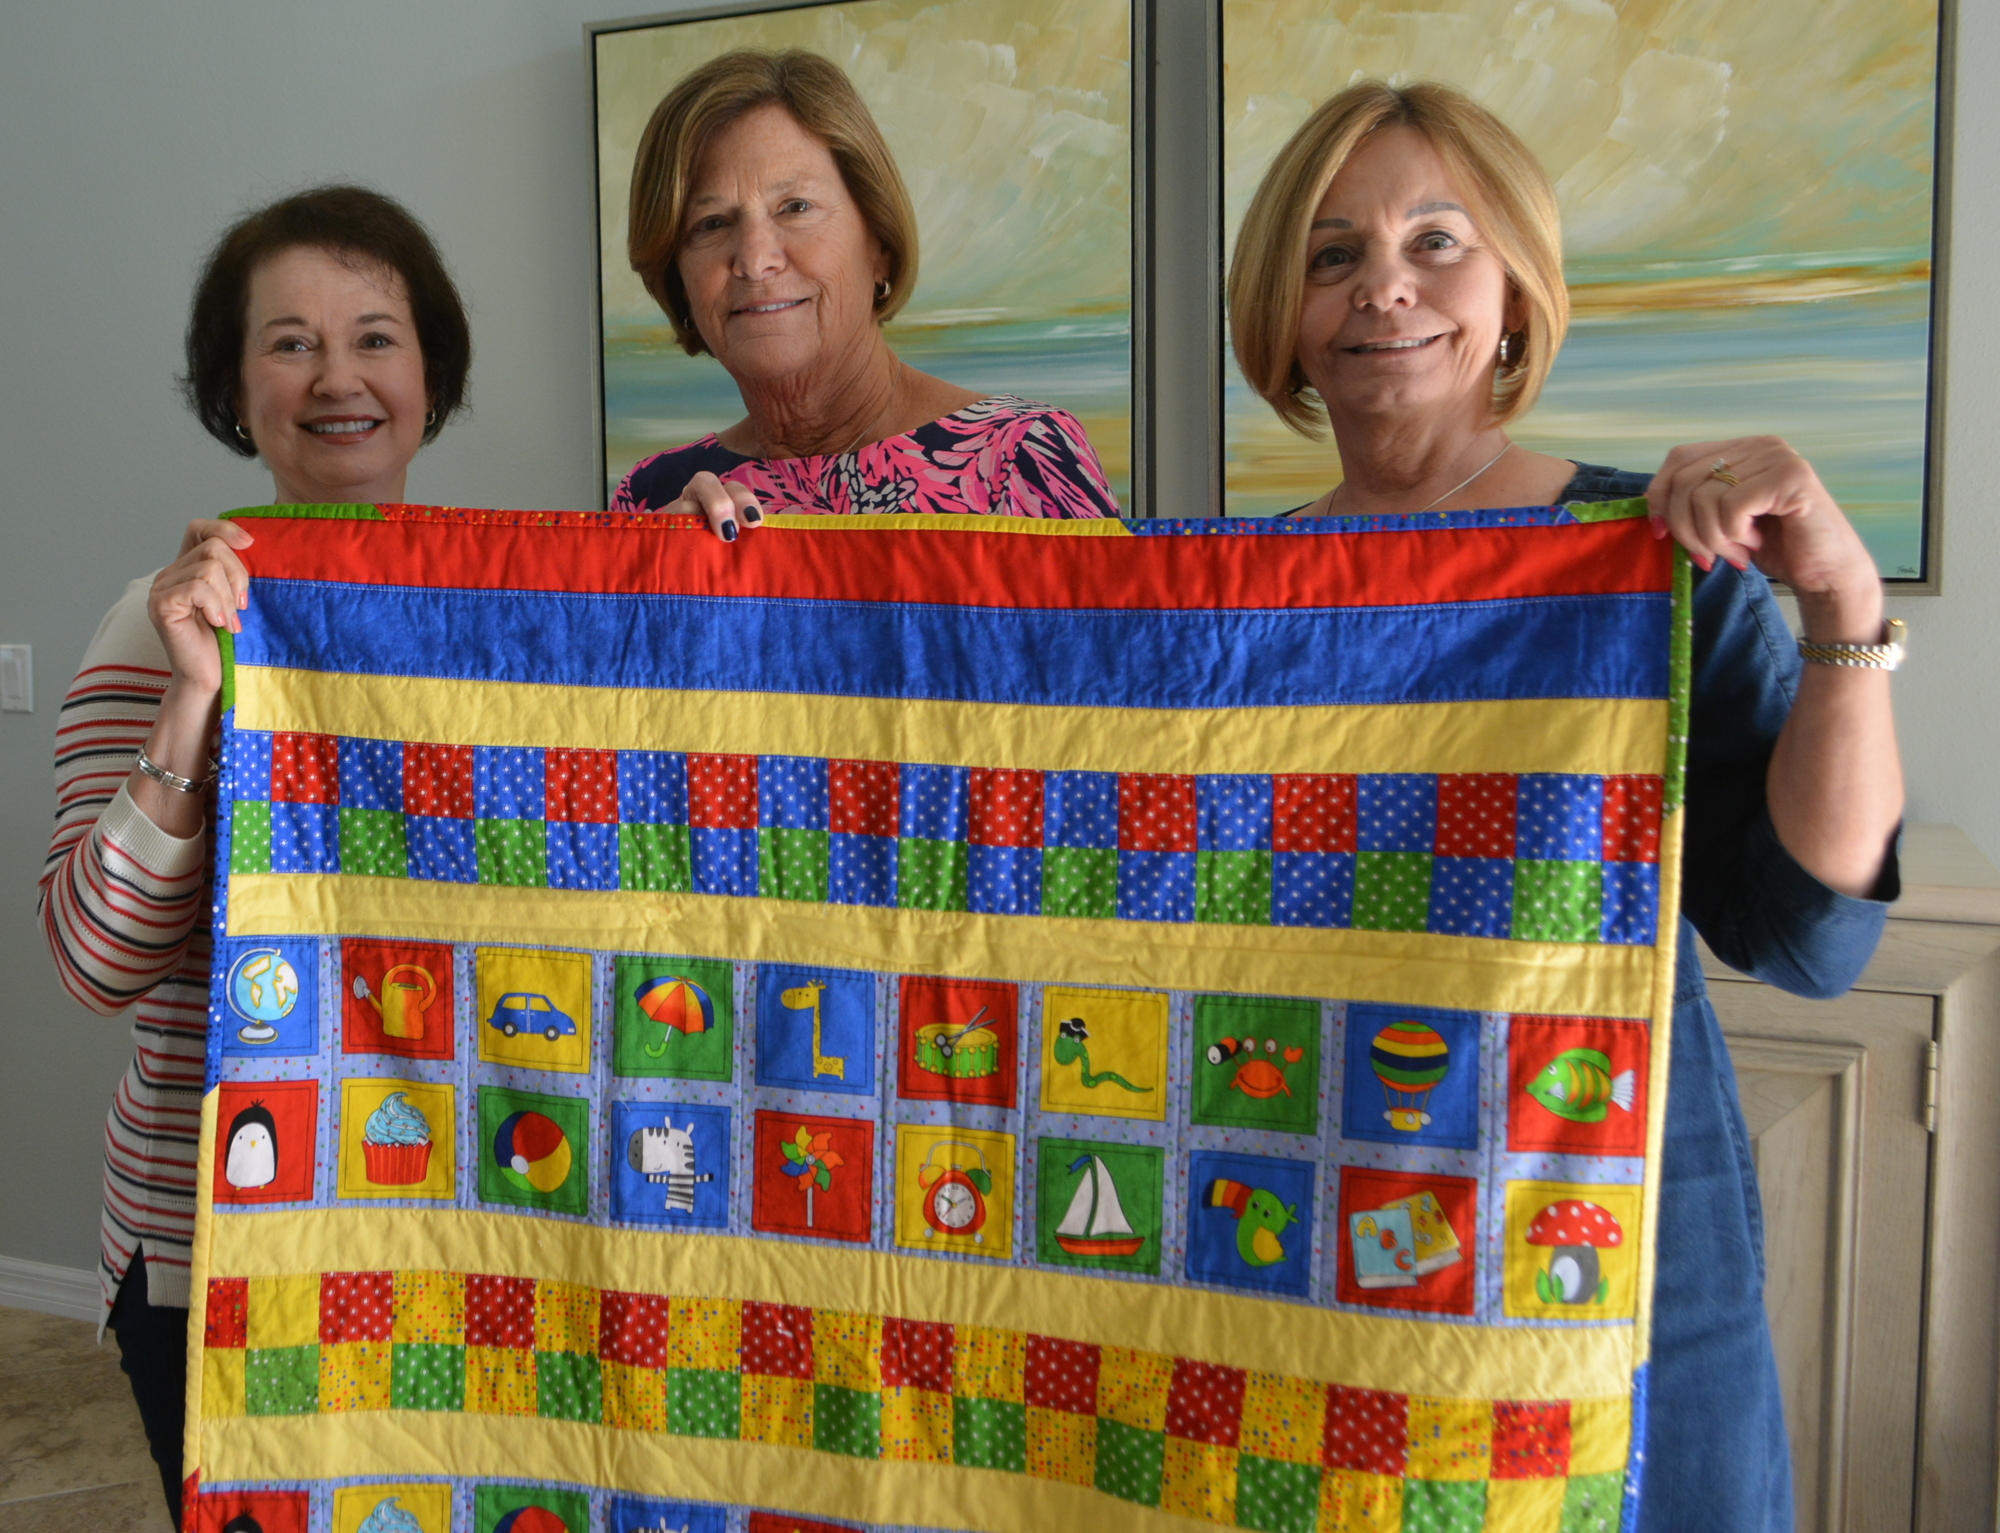 Pam Szabo, Linda Stone and Diane Laybourn show off a blanket headed to a charity.